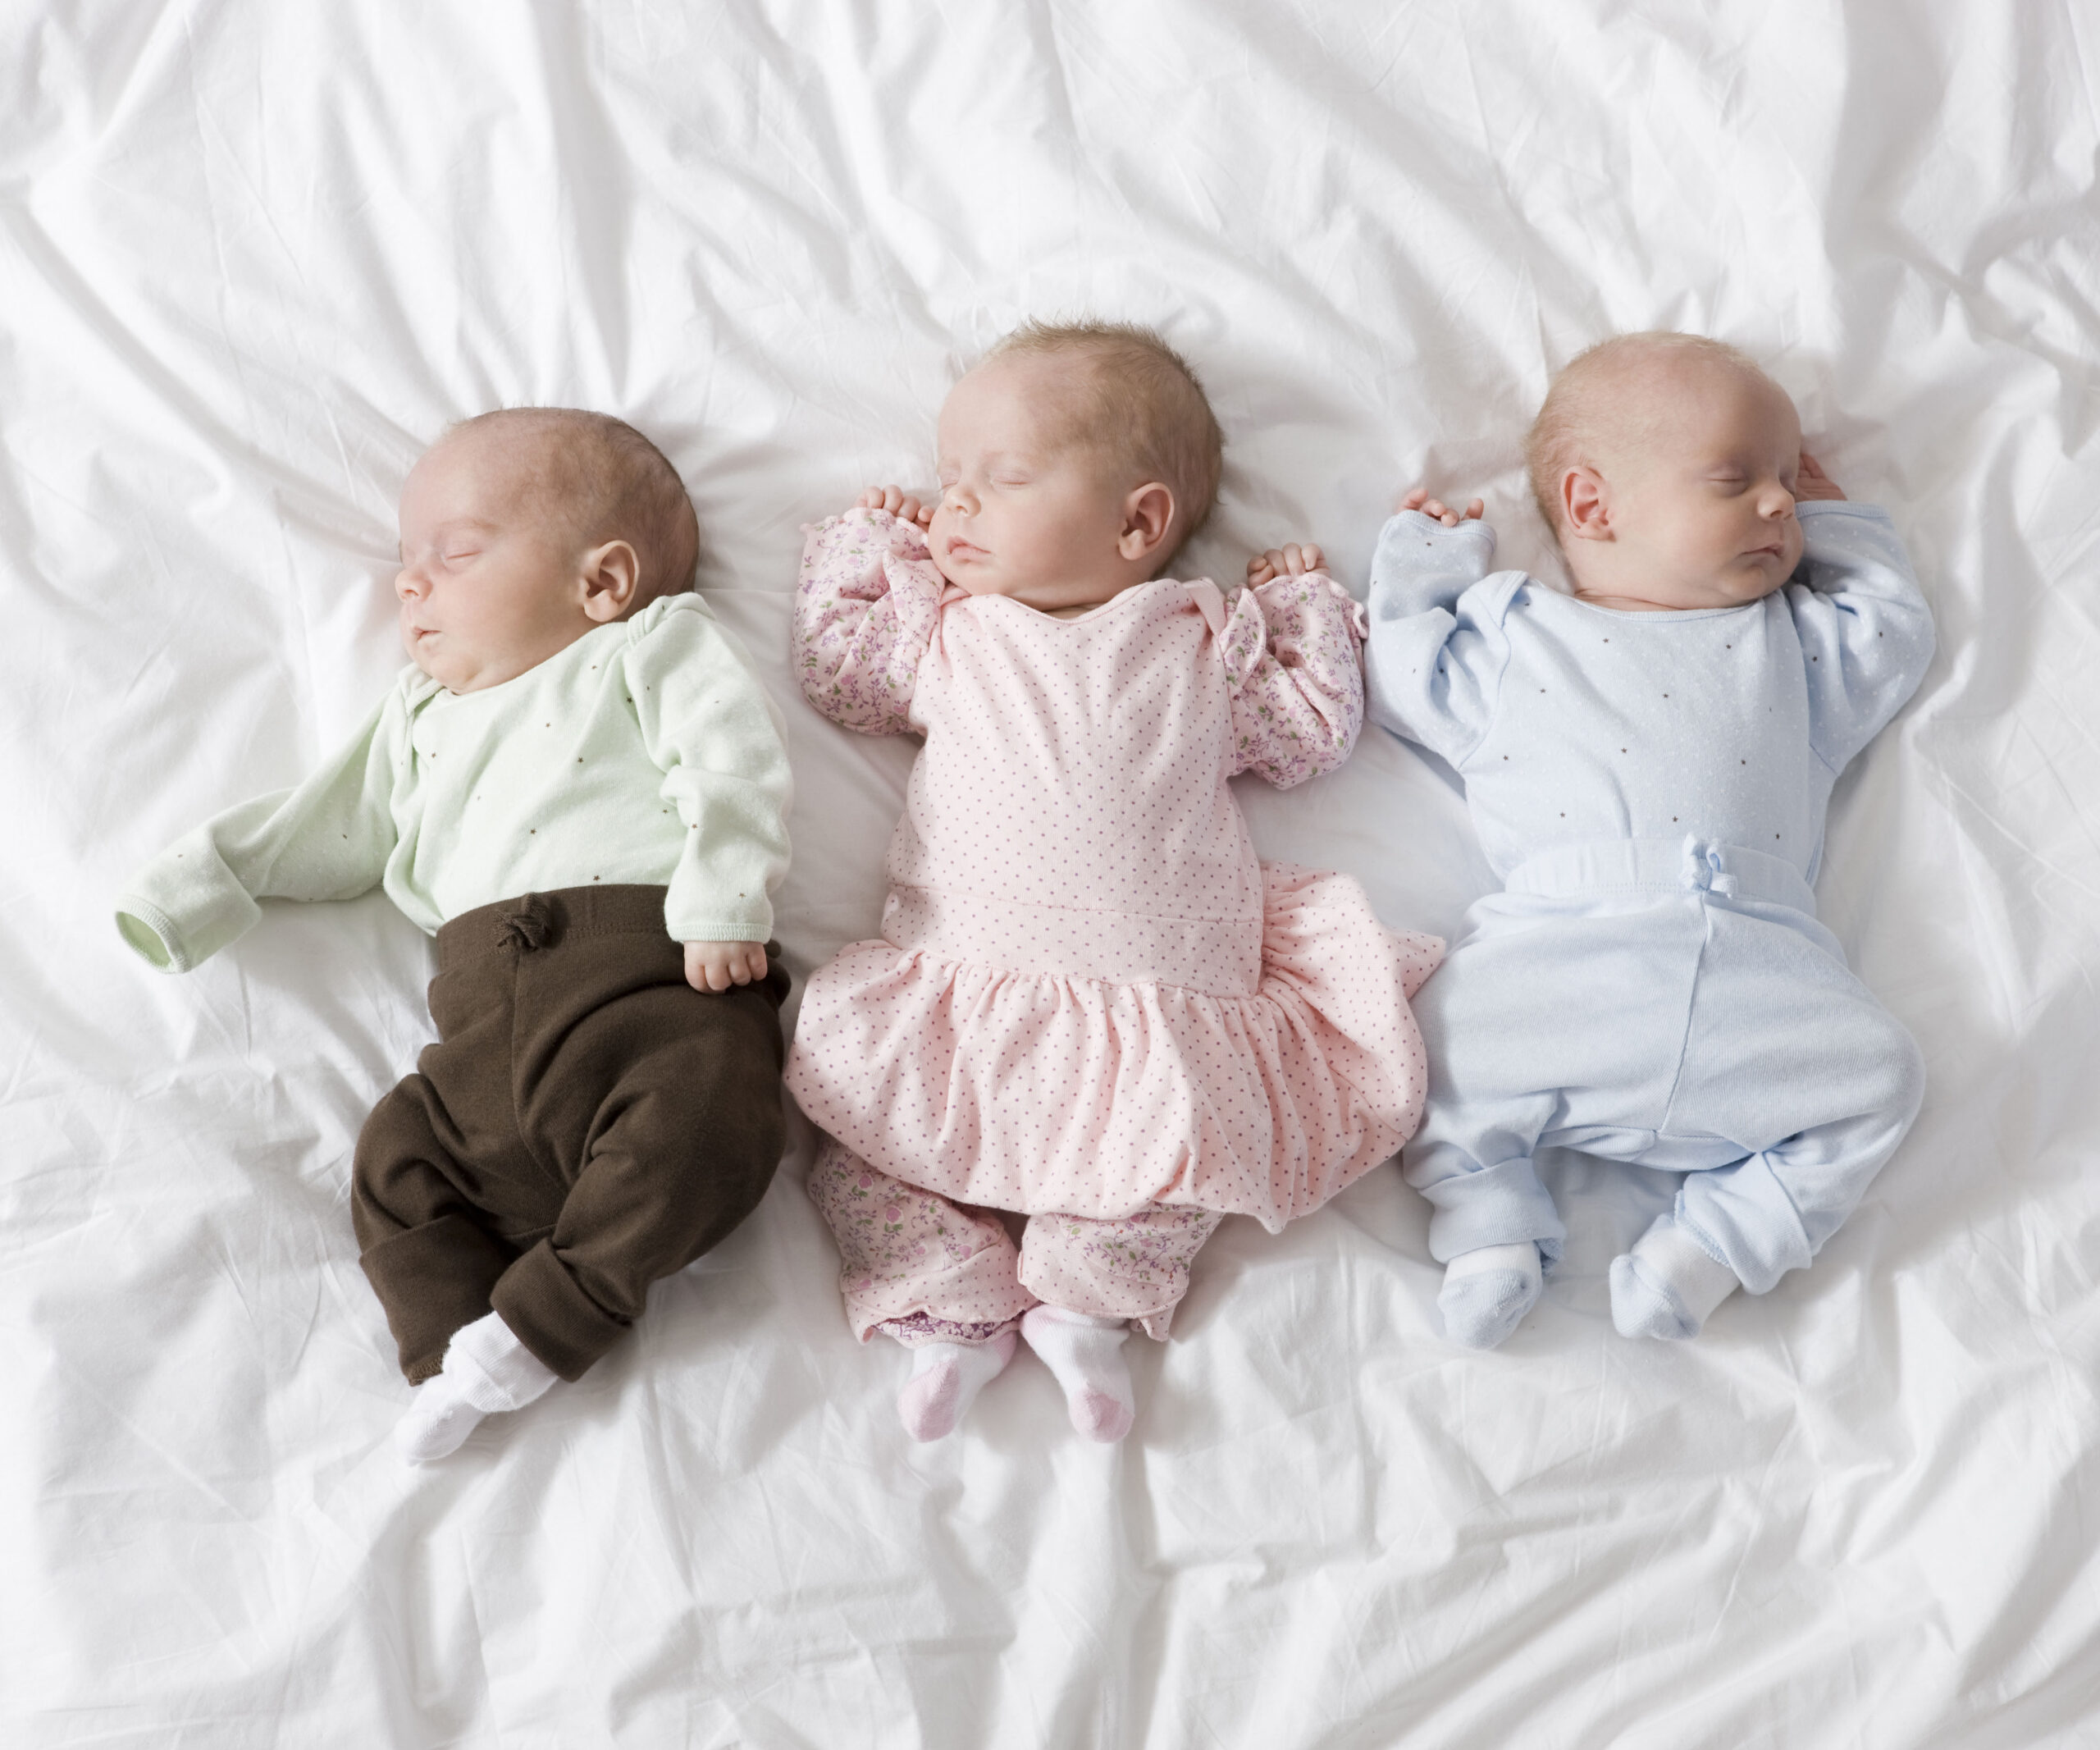 Grandmother, 55, gives birth to triplets